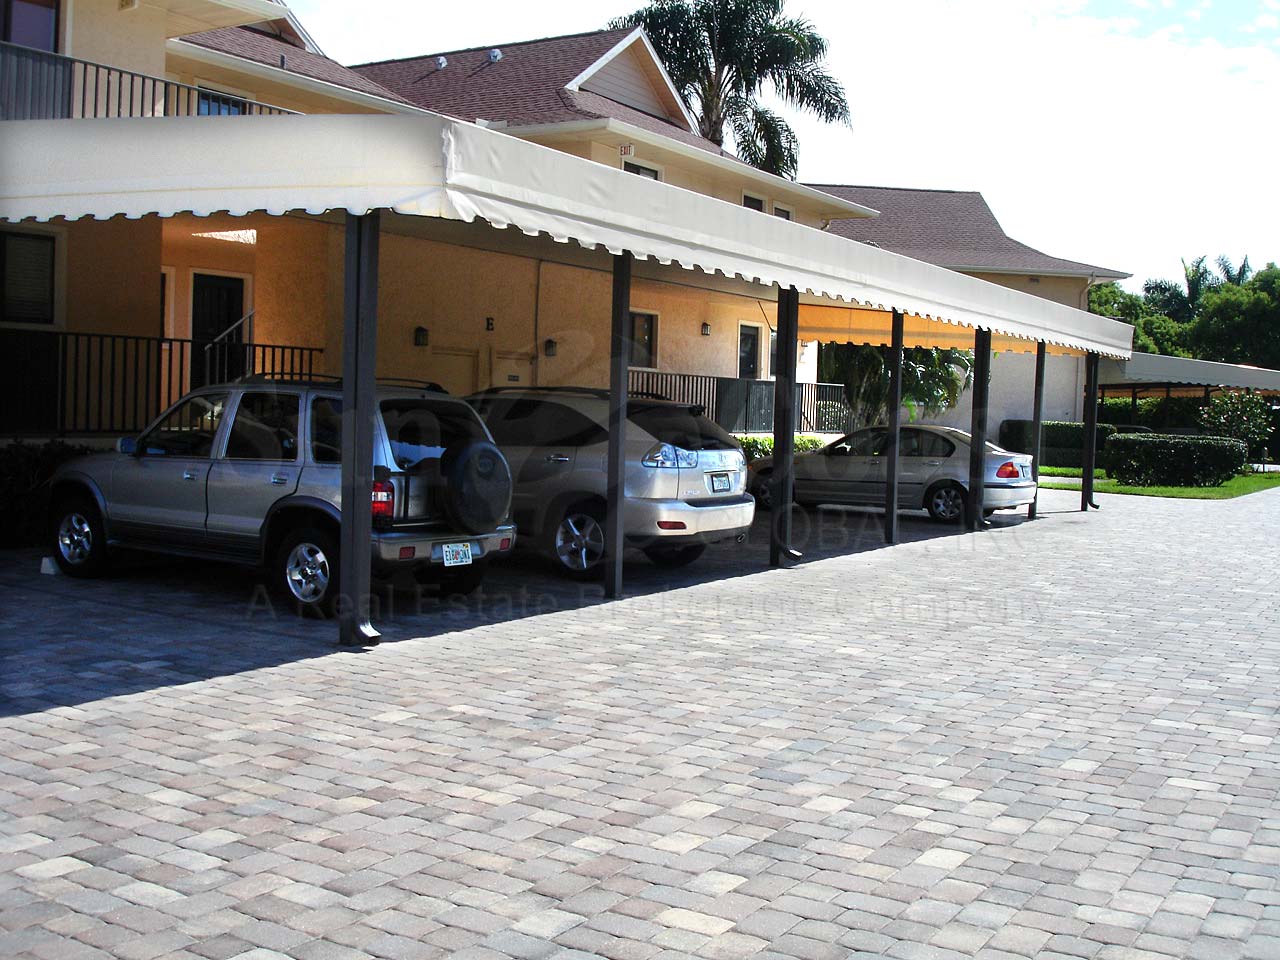 Bayside Villas Covered Parking